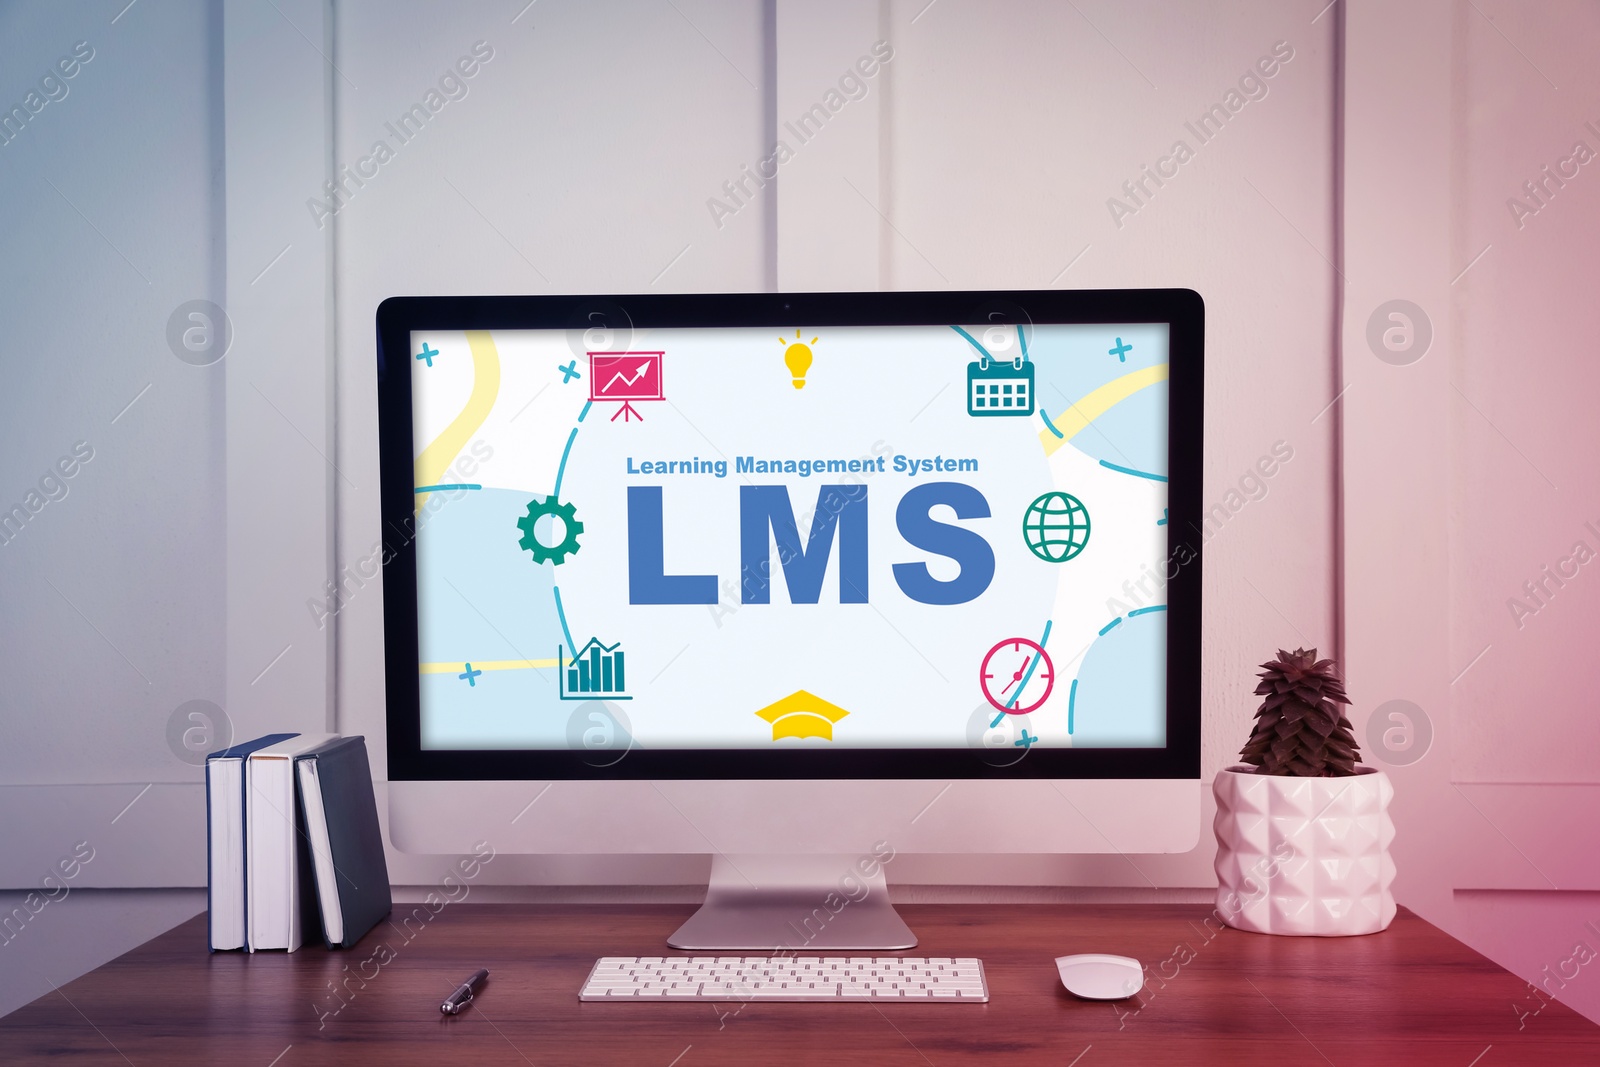 Image of Learning Management System. Computer monitor with different icons and abbreviation LMS on screen. Workplace with modern device, notebooks and houseplant